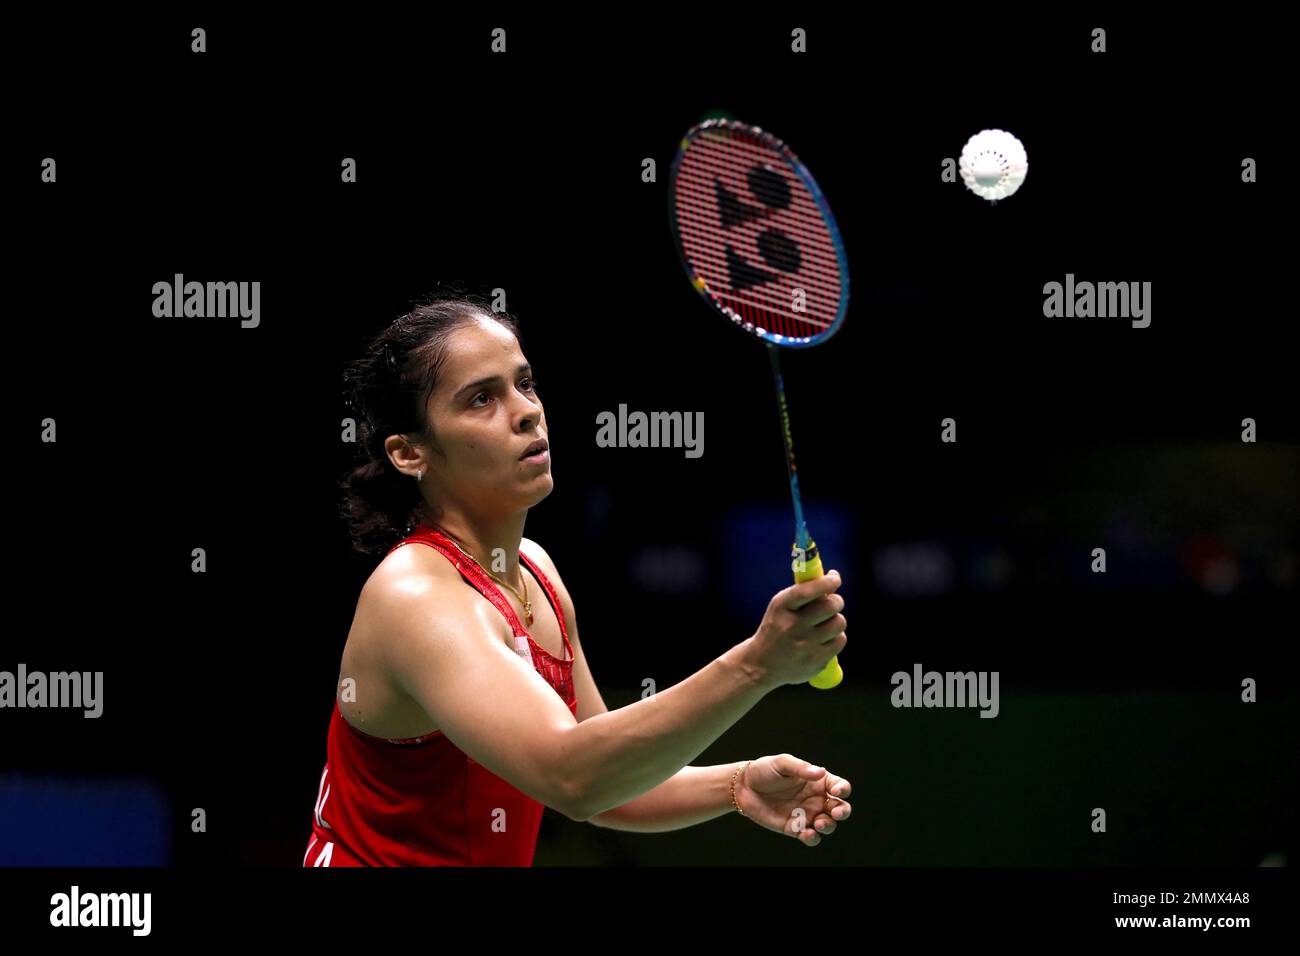 Saina Nehwal of India plays a shot while competing against Aliye Demirbag of Turkey during their womens badminton singles match at the BWF World Championships in Nanjing, China, Tuesday, July 31, 2018